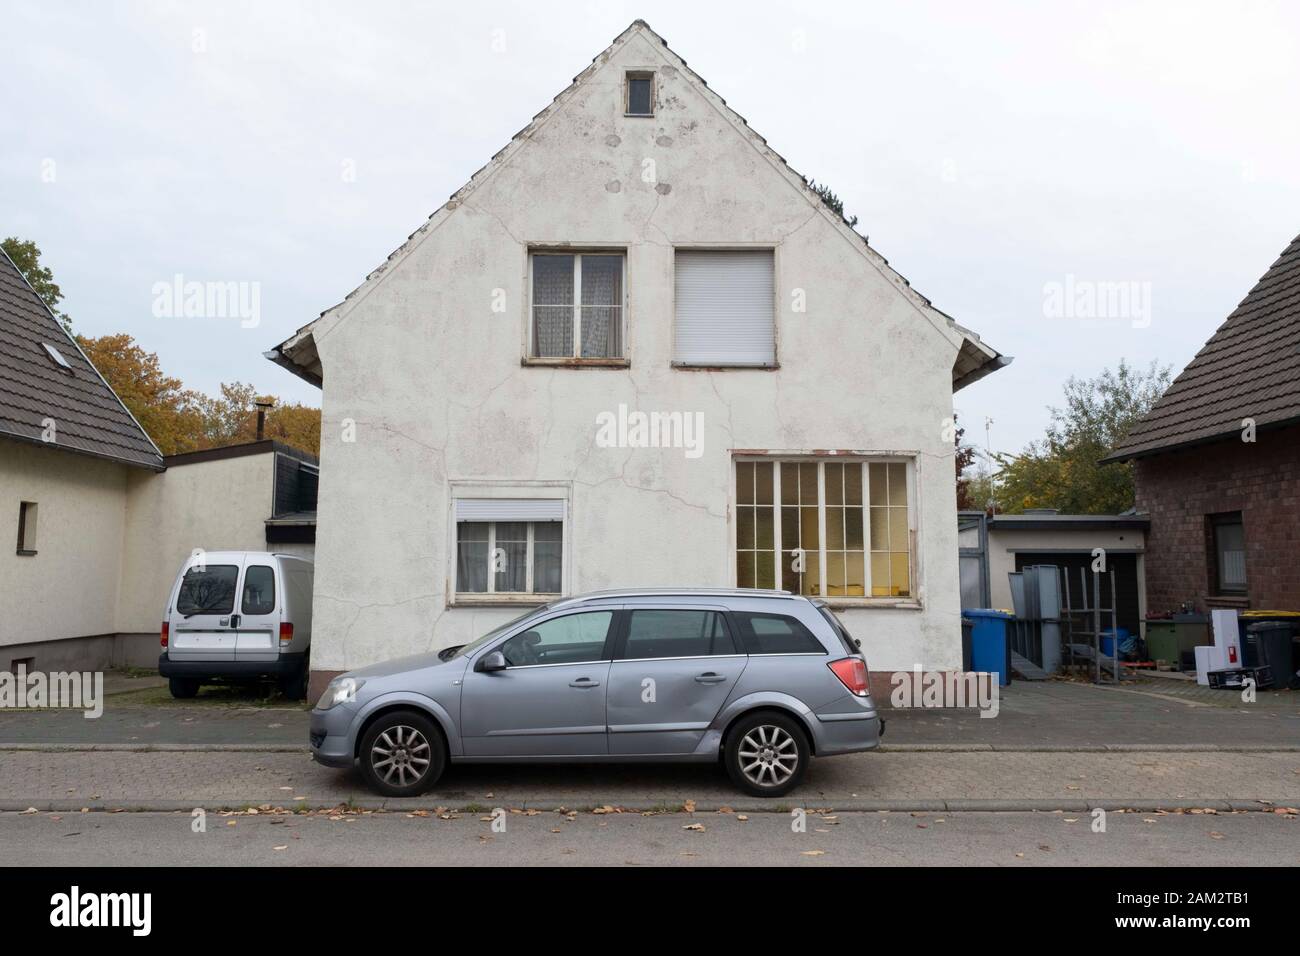 Cars parked outside house in town abandoned for coal mining, Mannheim, Germany Stock Photo